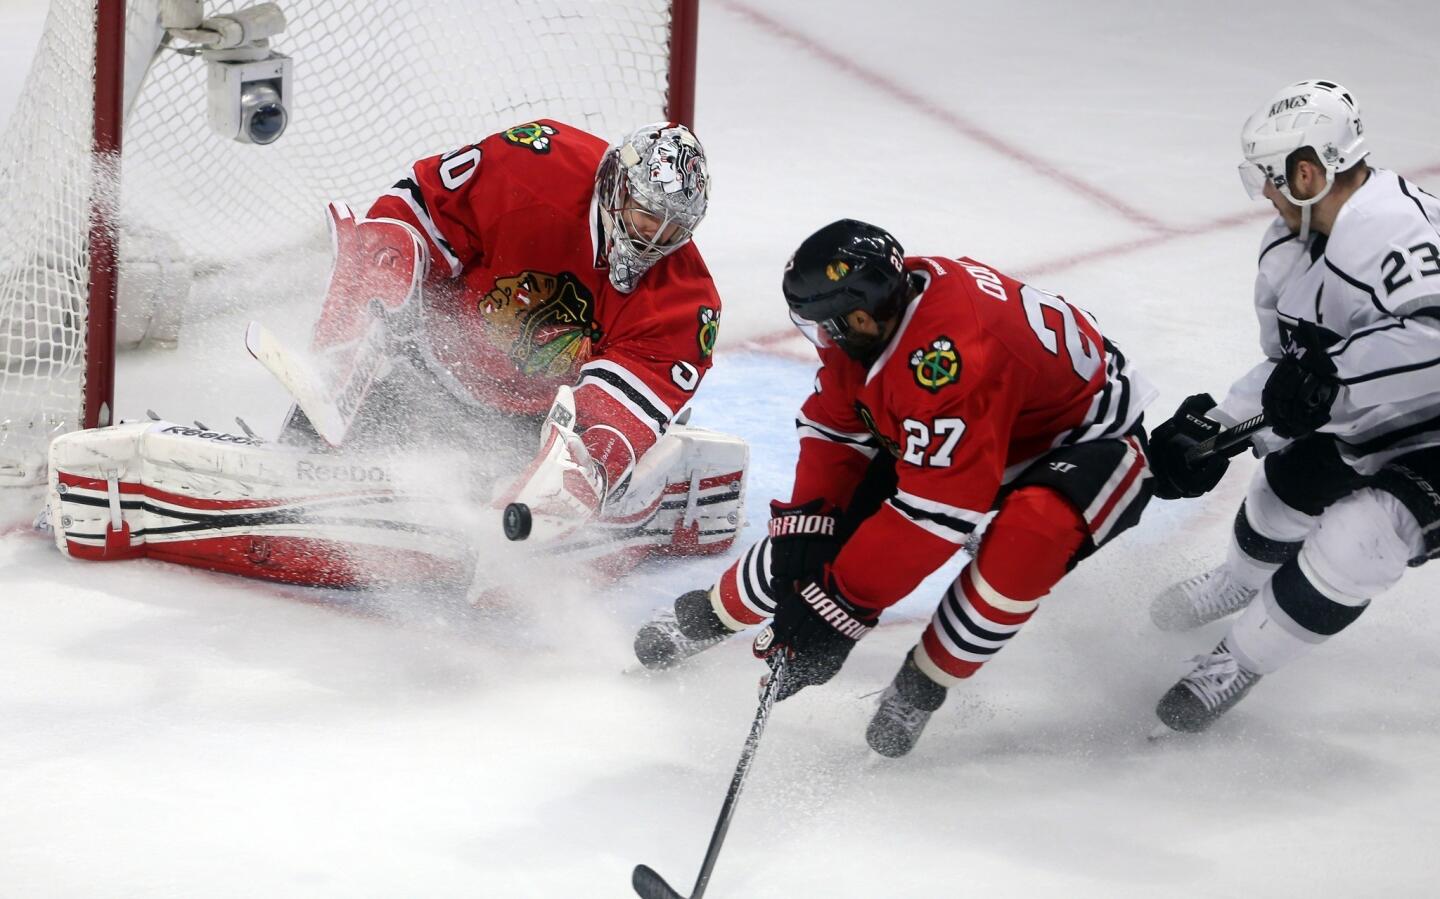 Blackhawks goaltender Corey Crawford makes a save on a shot by Kings left wing Dustin Brown in the third period of Game 2 at United Center in Chicago.